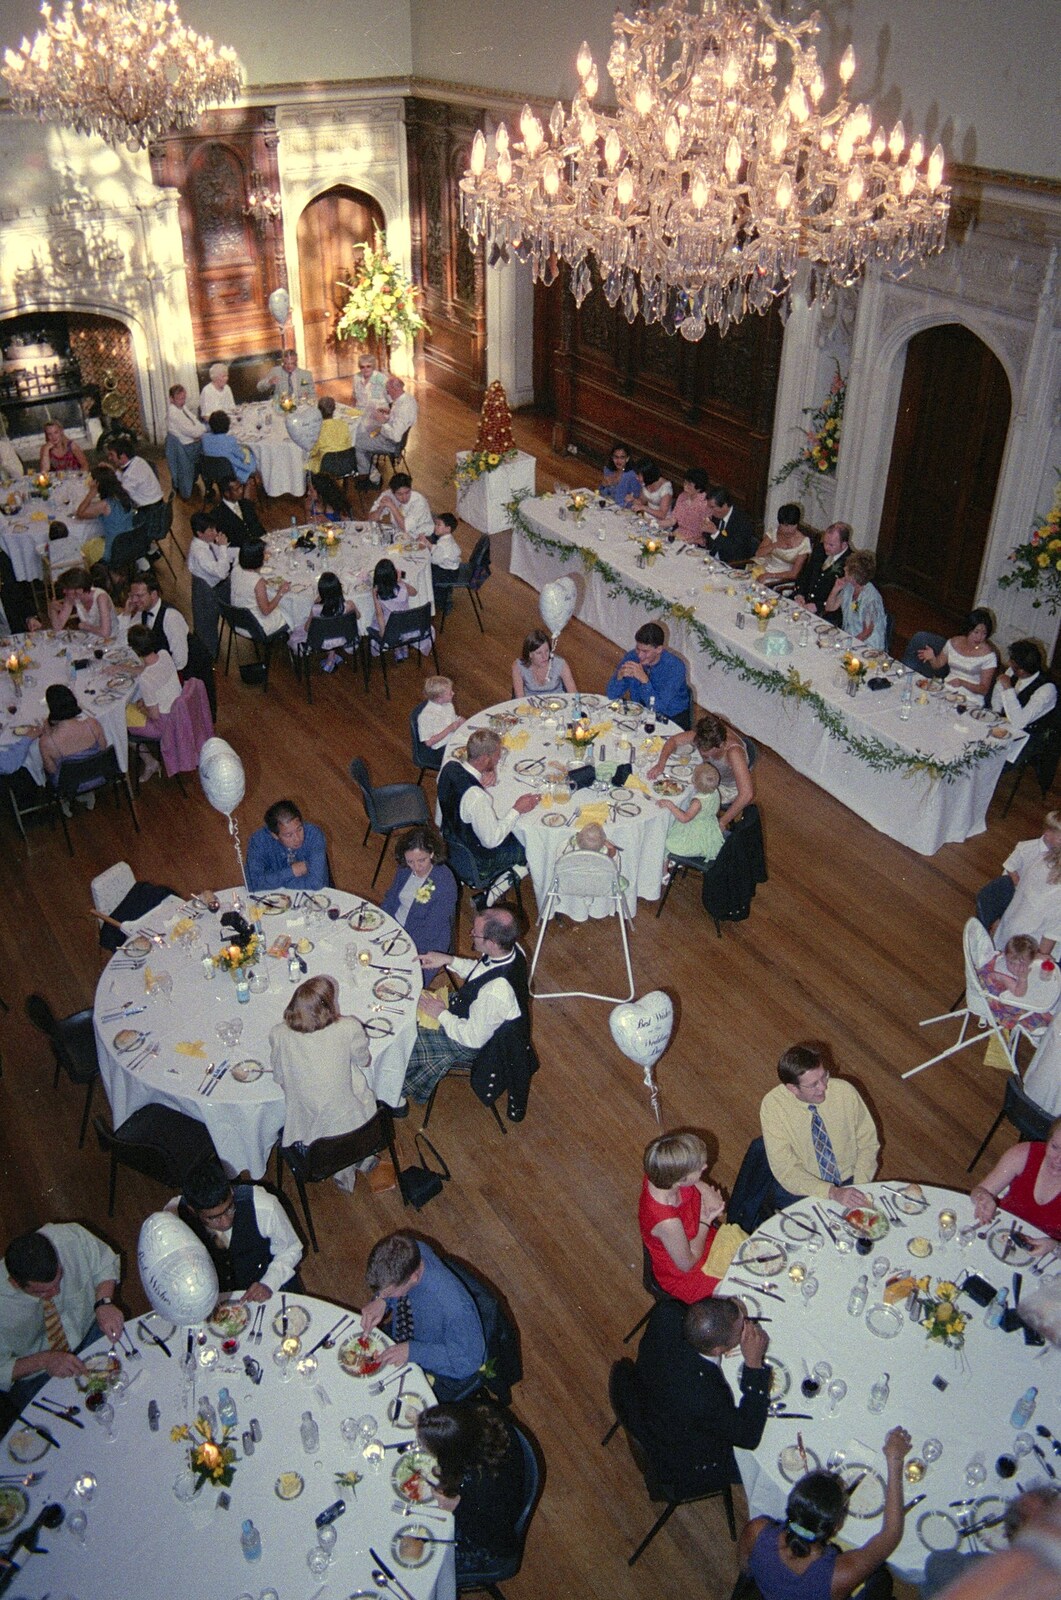 Hamish and Jane's Wedding, Canford School, Wimborne, Dorset - 5th August 1998: More dining and chandeliers